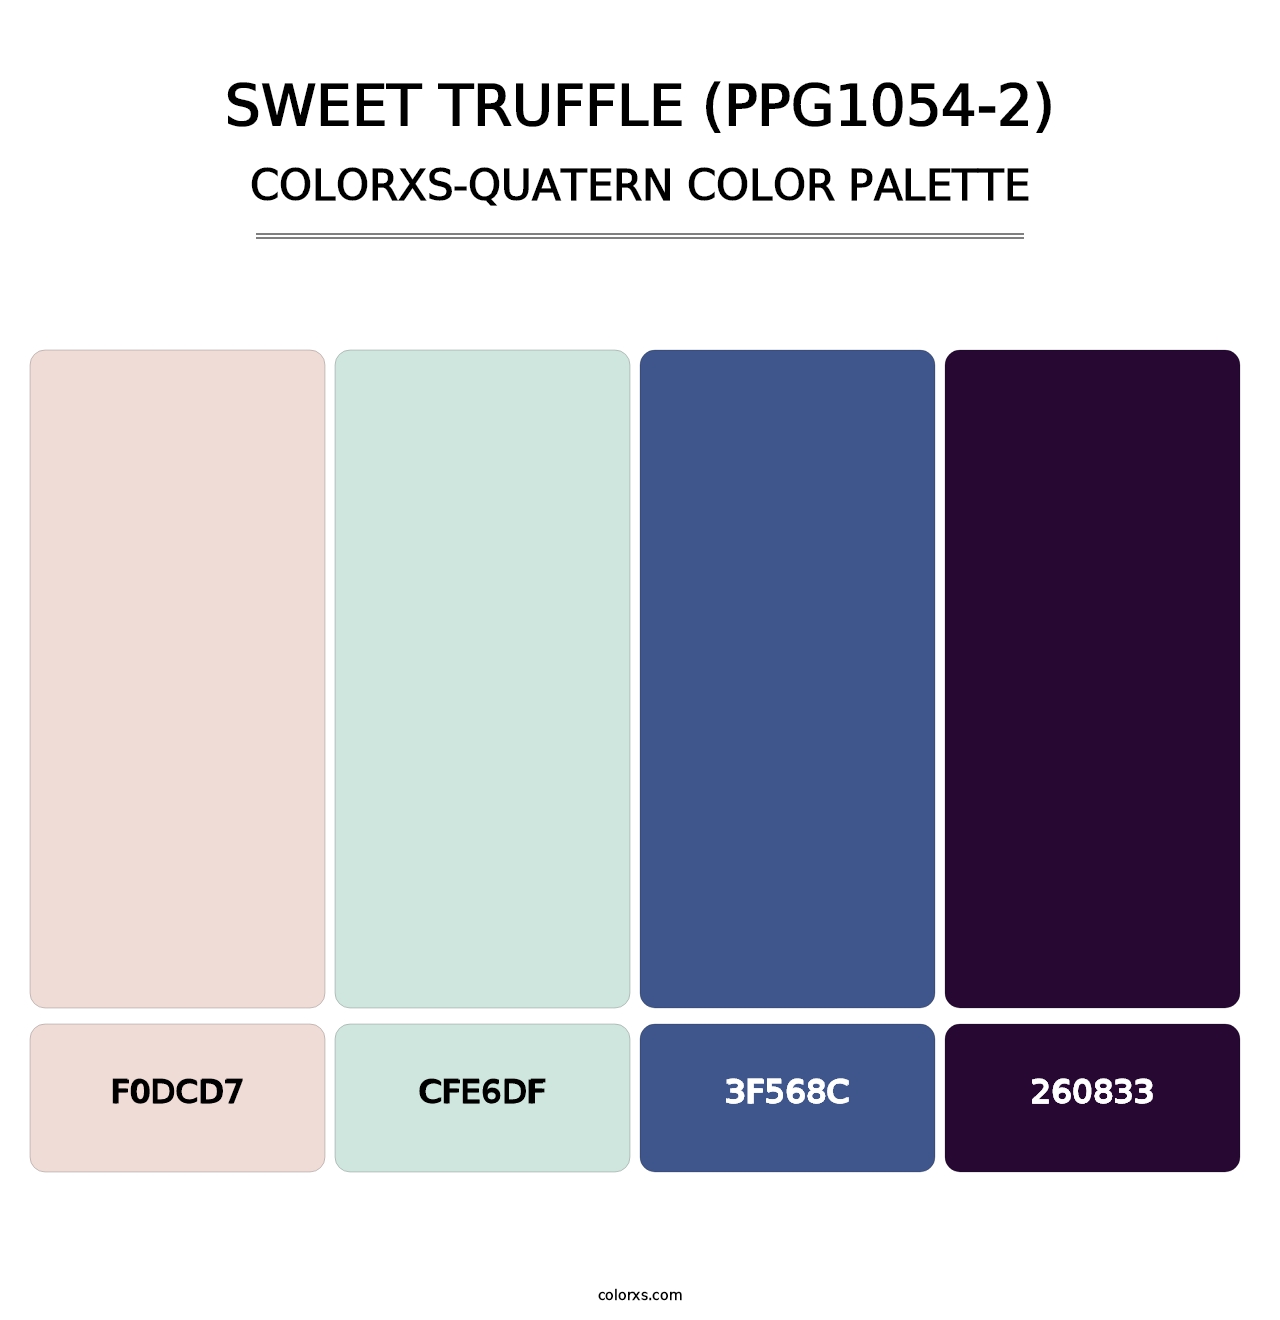 Sweet Truffle (PPG1054-2) - Colorxs Quatern Palette